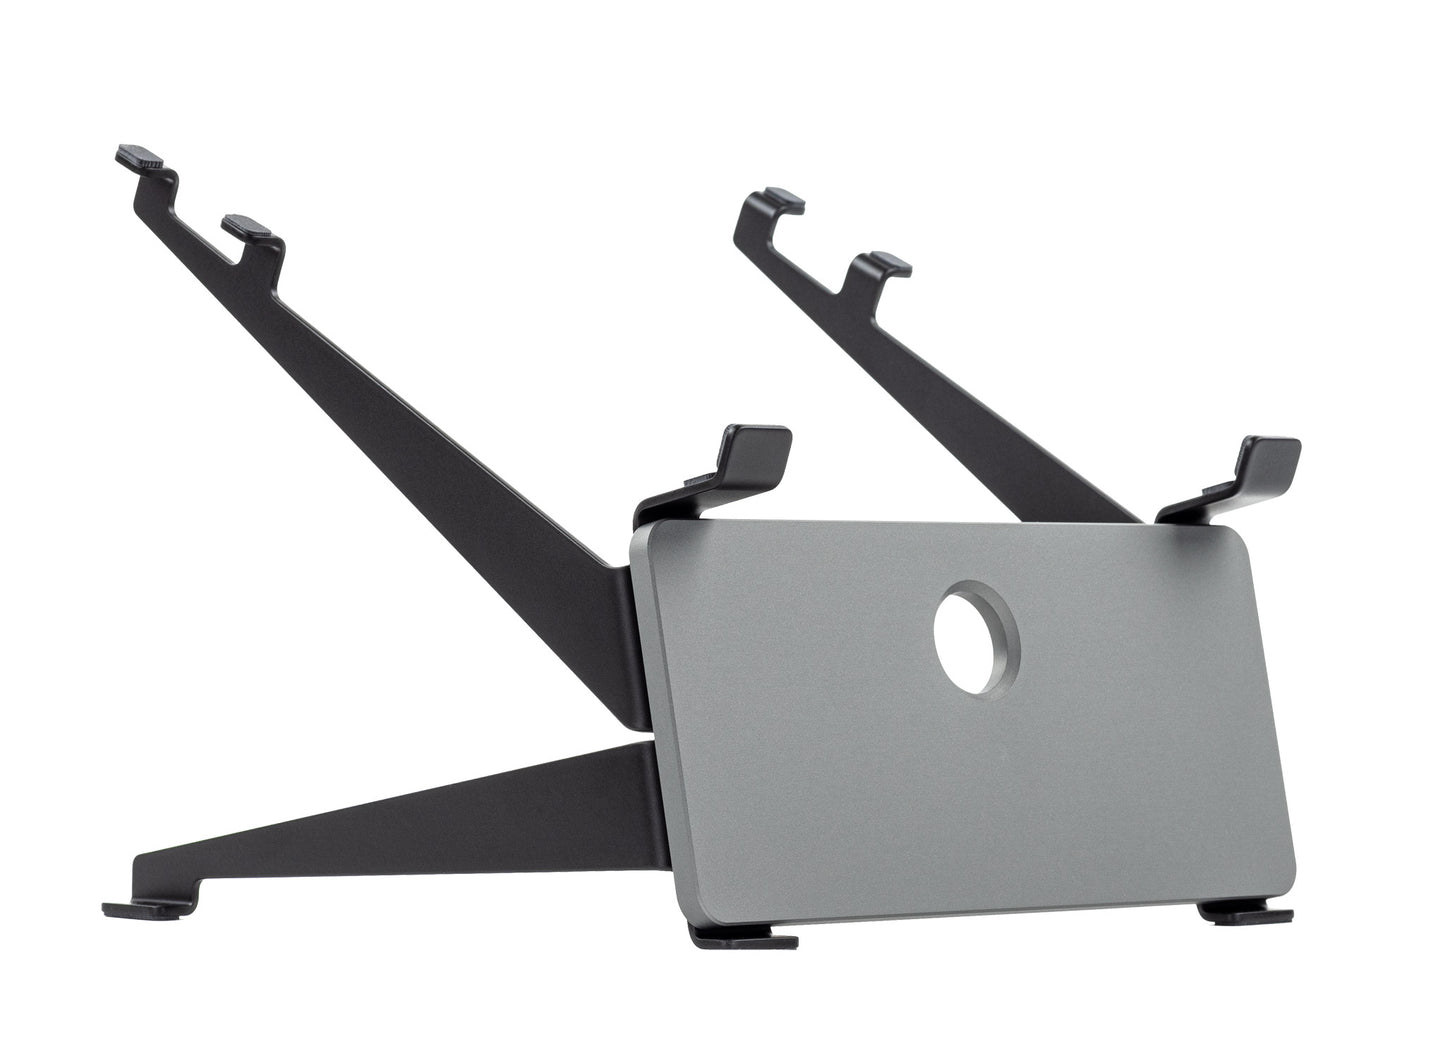 SVALT Cooling Stand model SRxN gray front side view for silent passive cooling performance with Apple and PC laptops